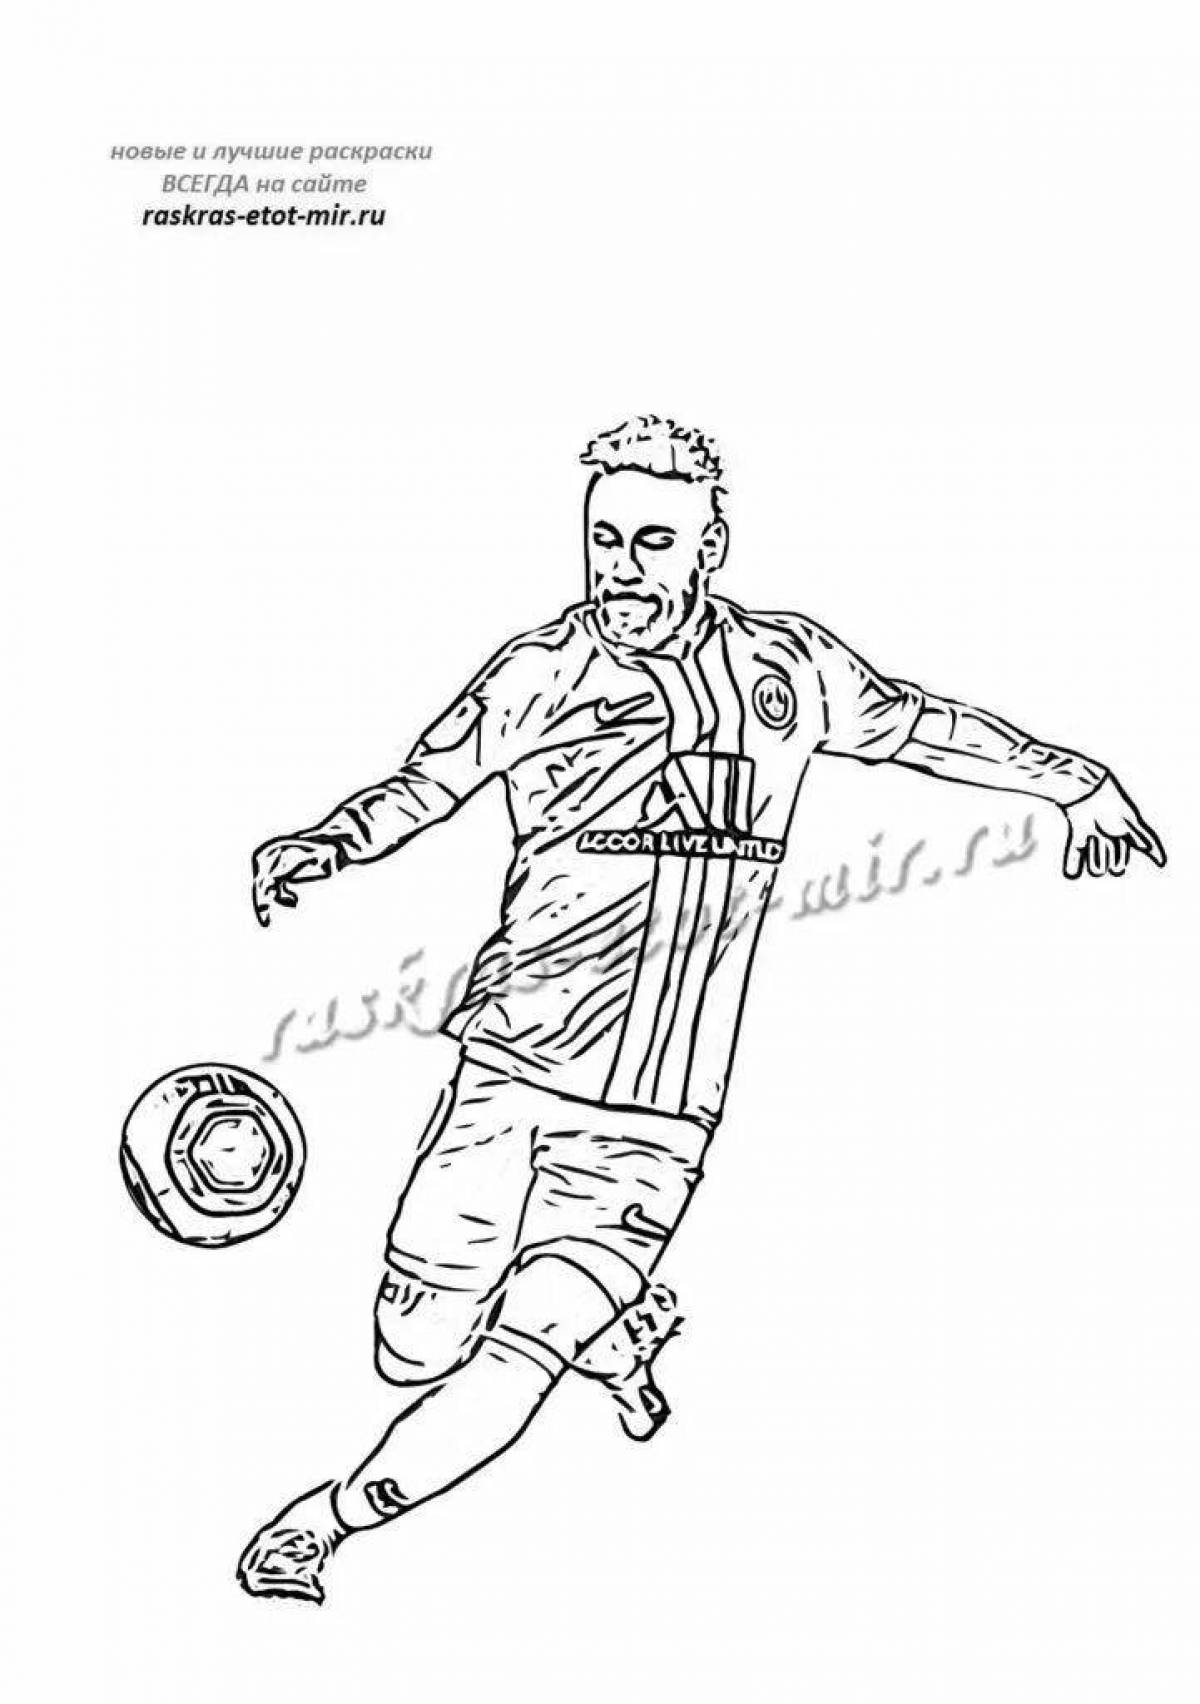 Coloring book outstanding football player neymar